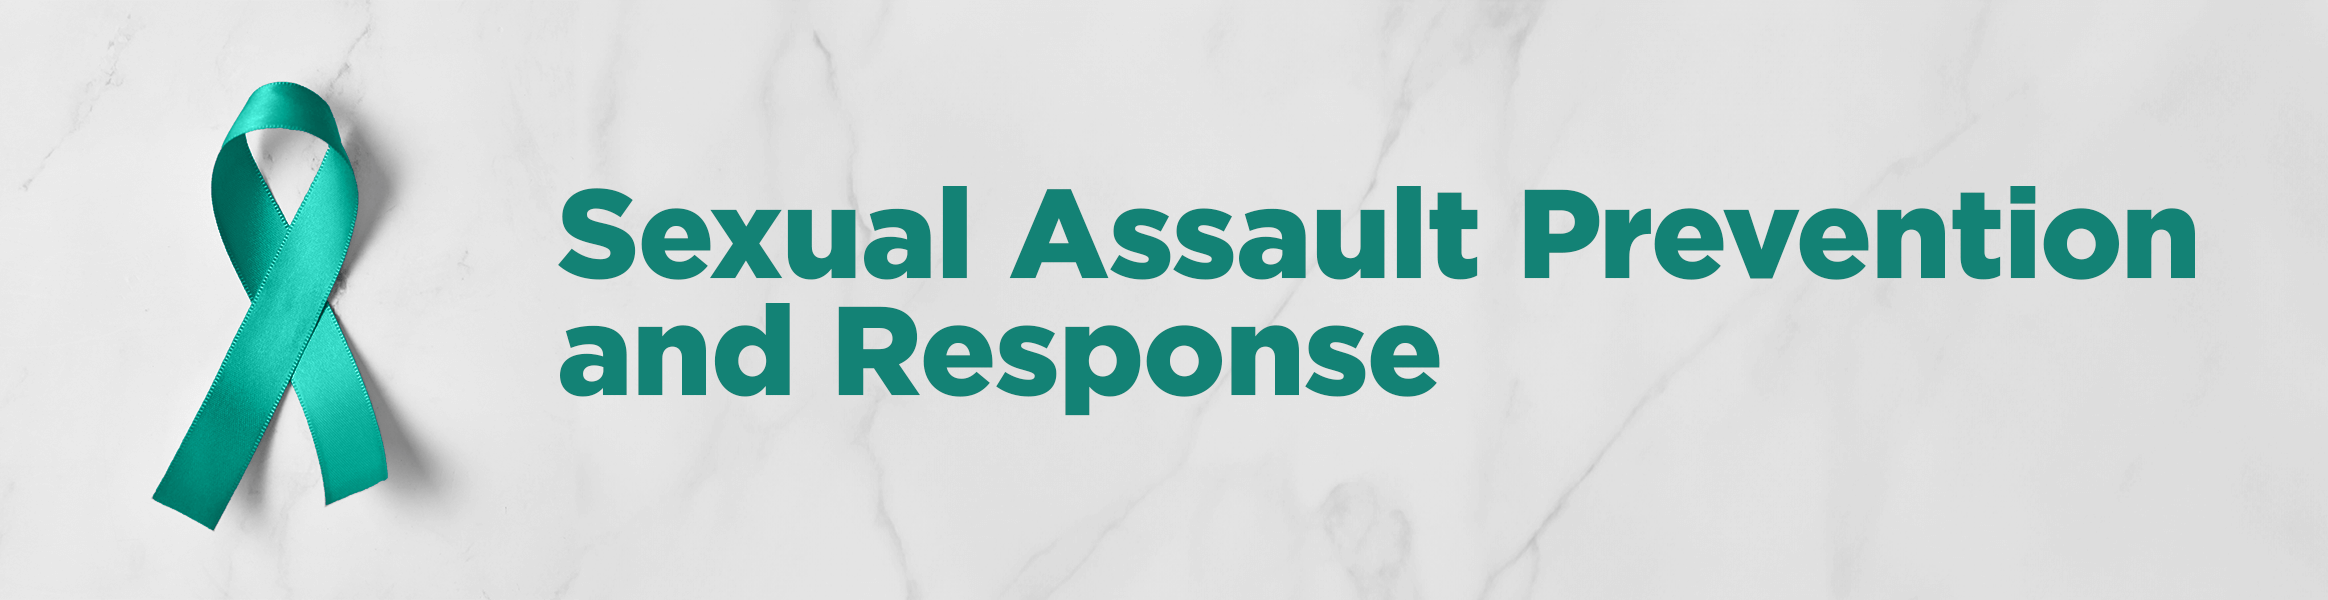 Sexual Assault Prevention and Response Banner